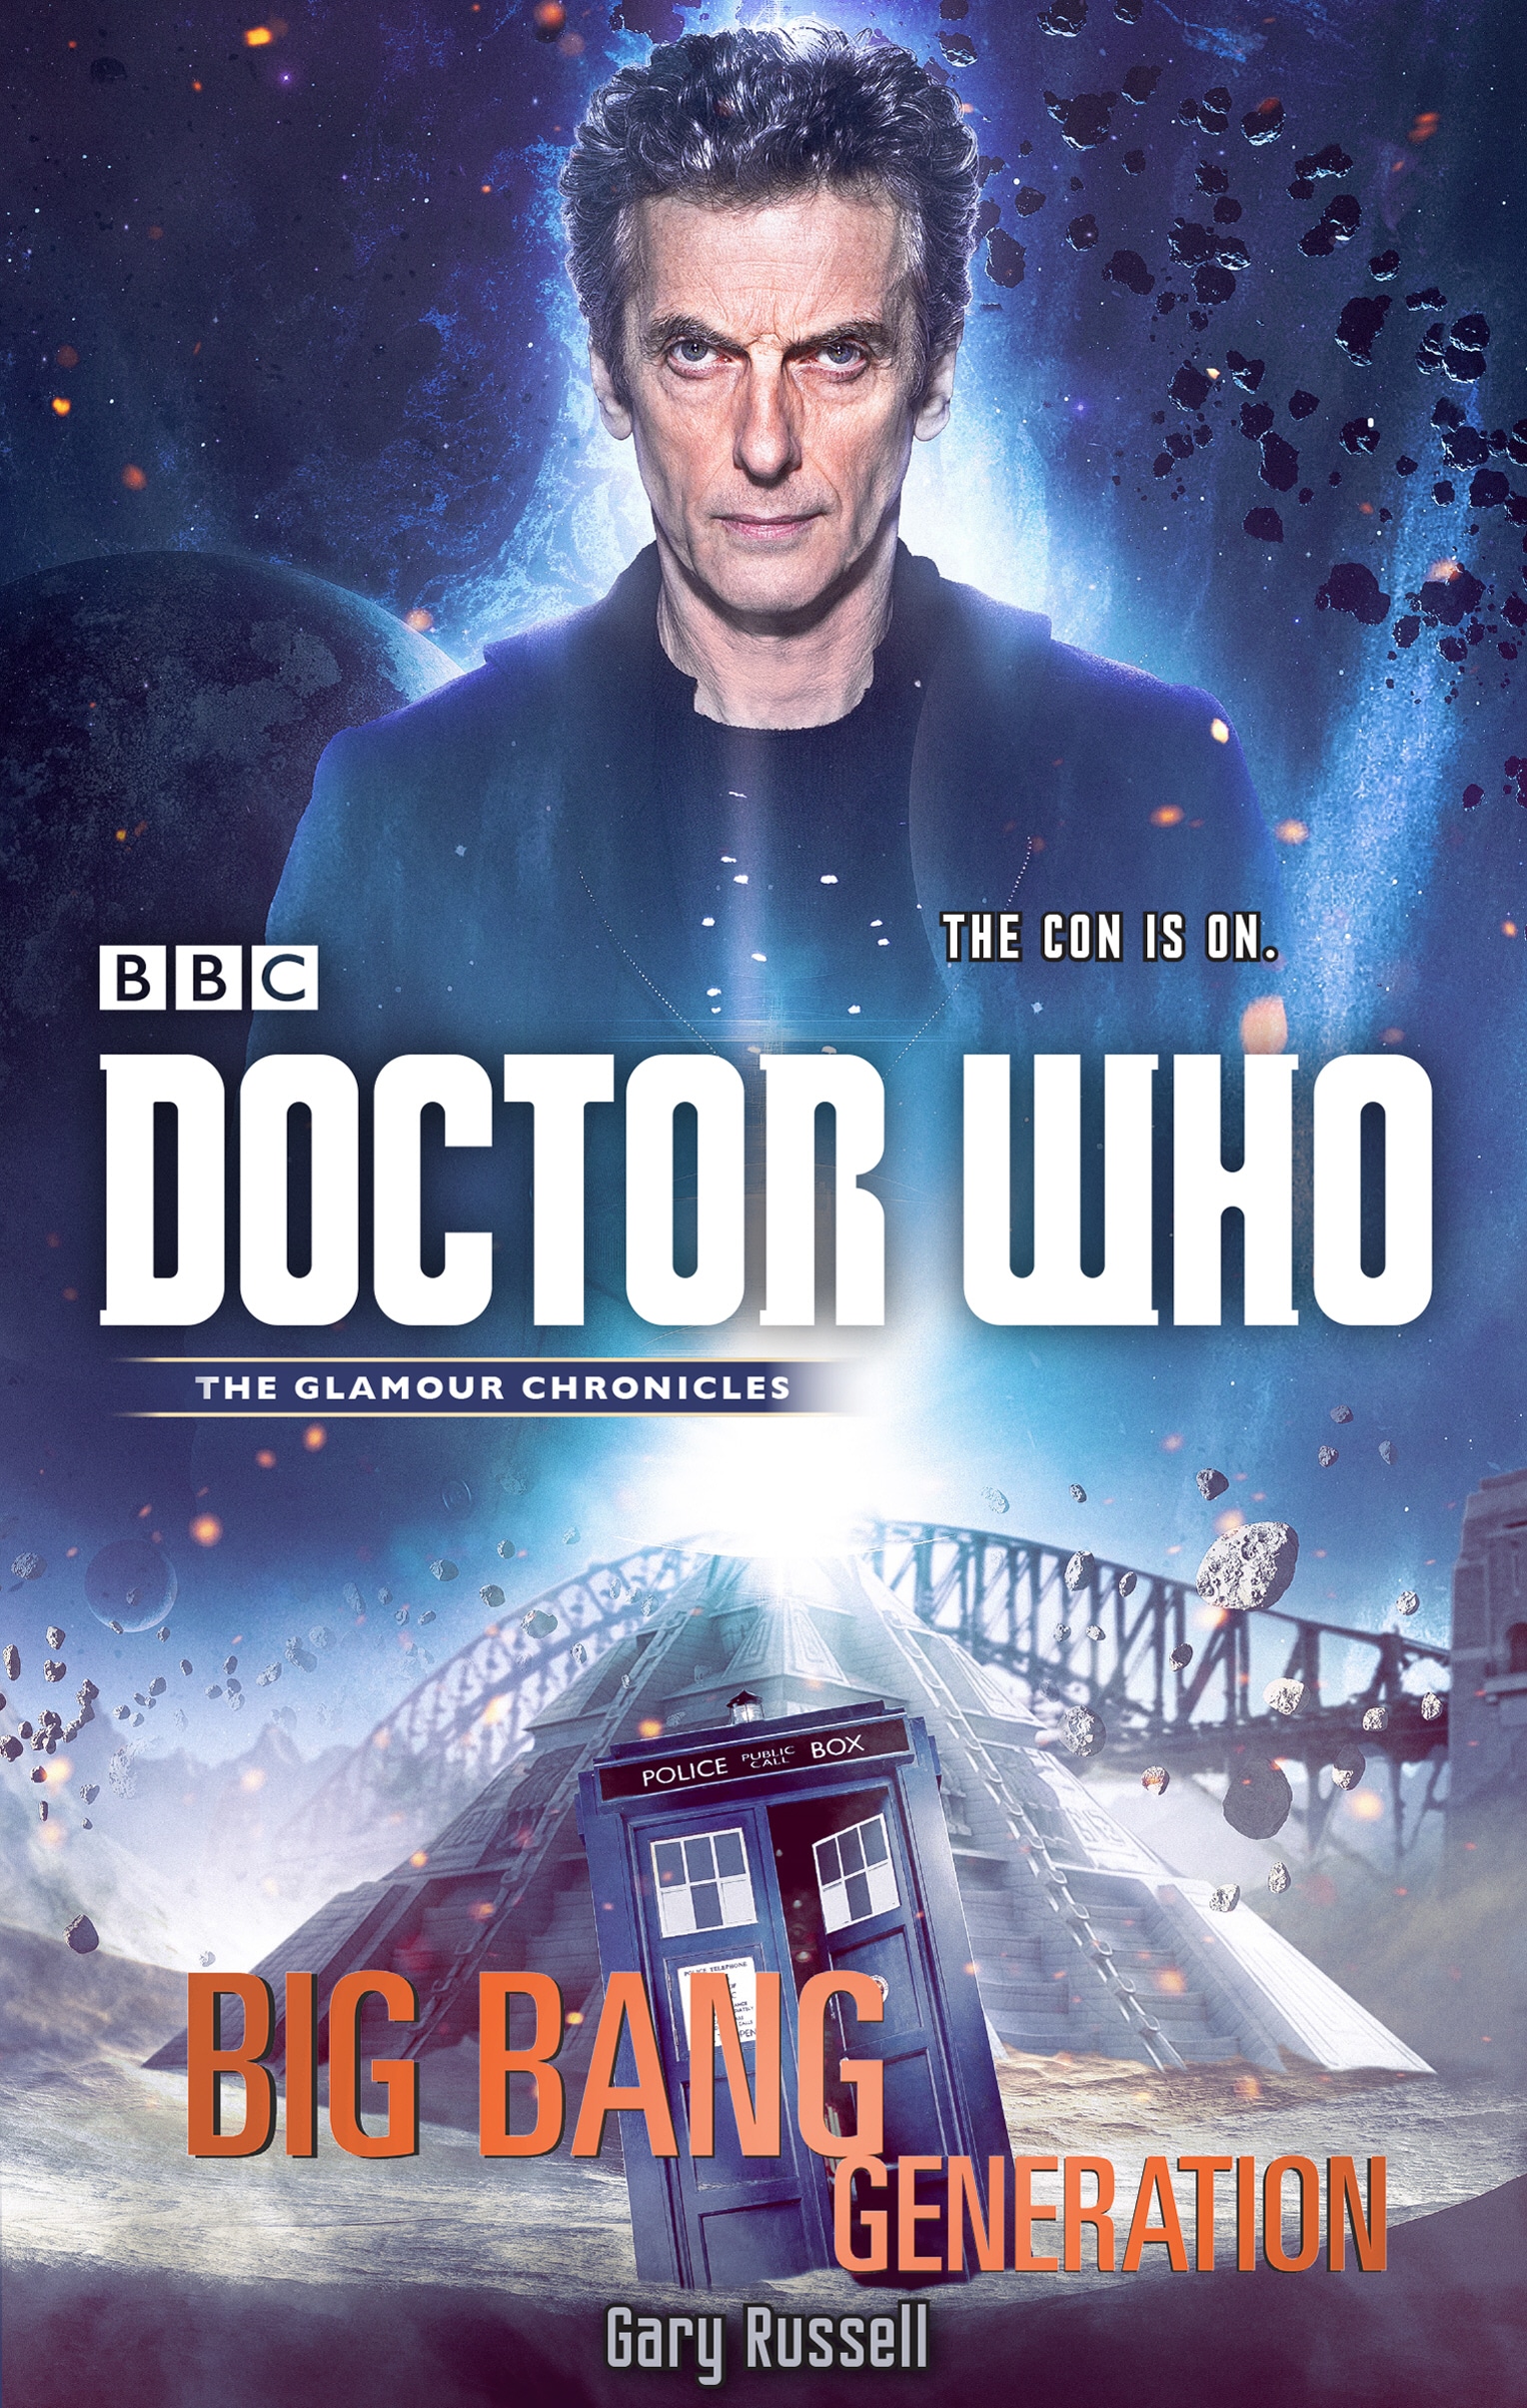 Book “Doctor Who: Big Bang Generation” by Gary Russell — October 3, 2019